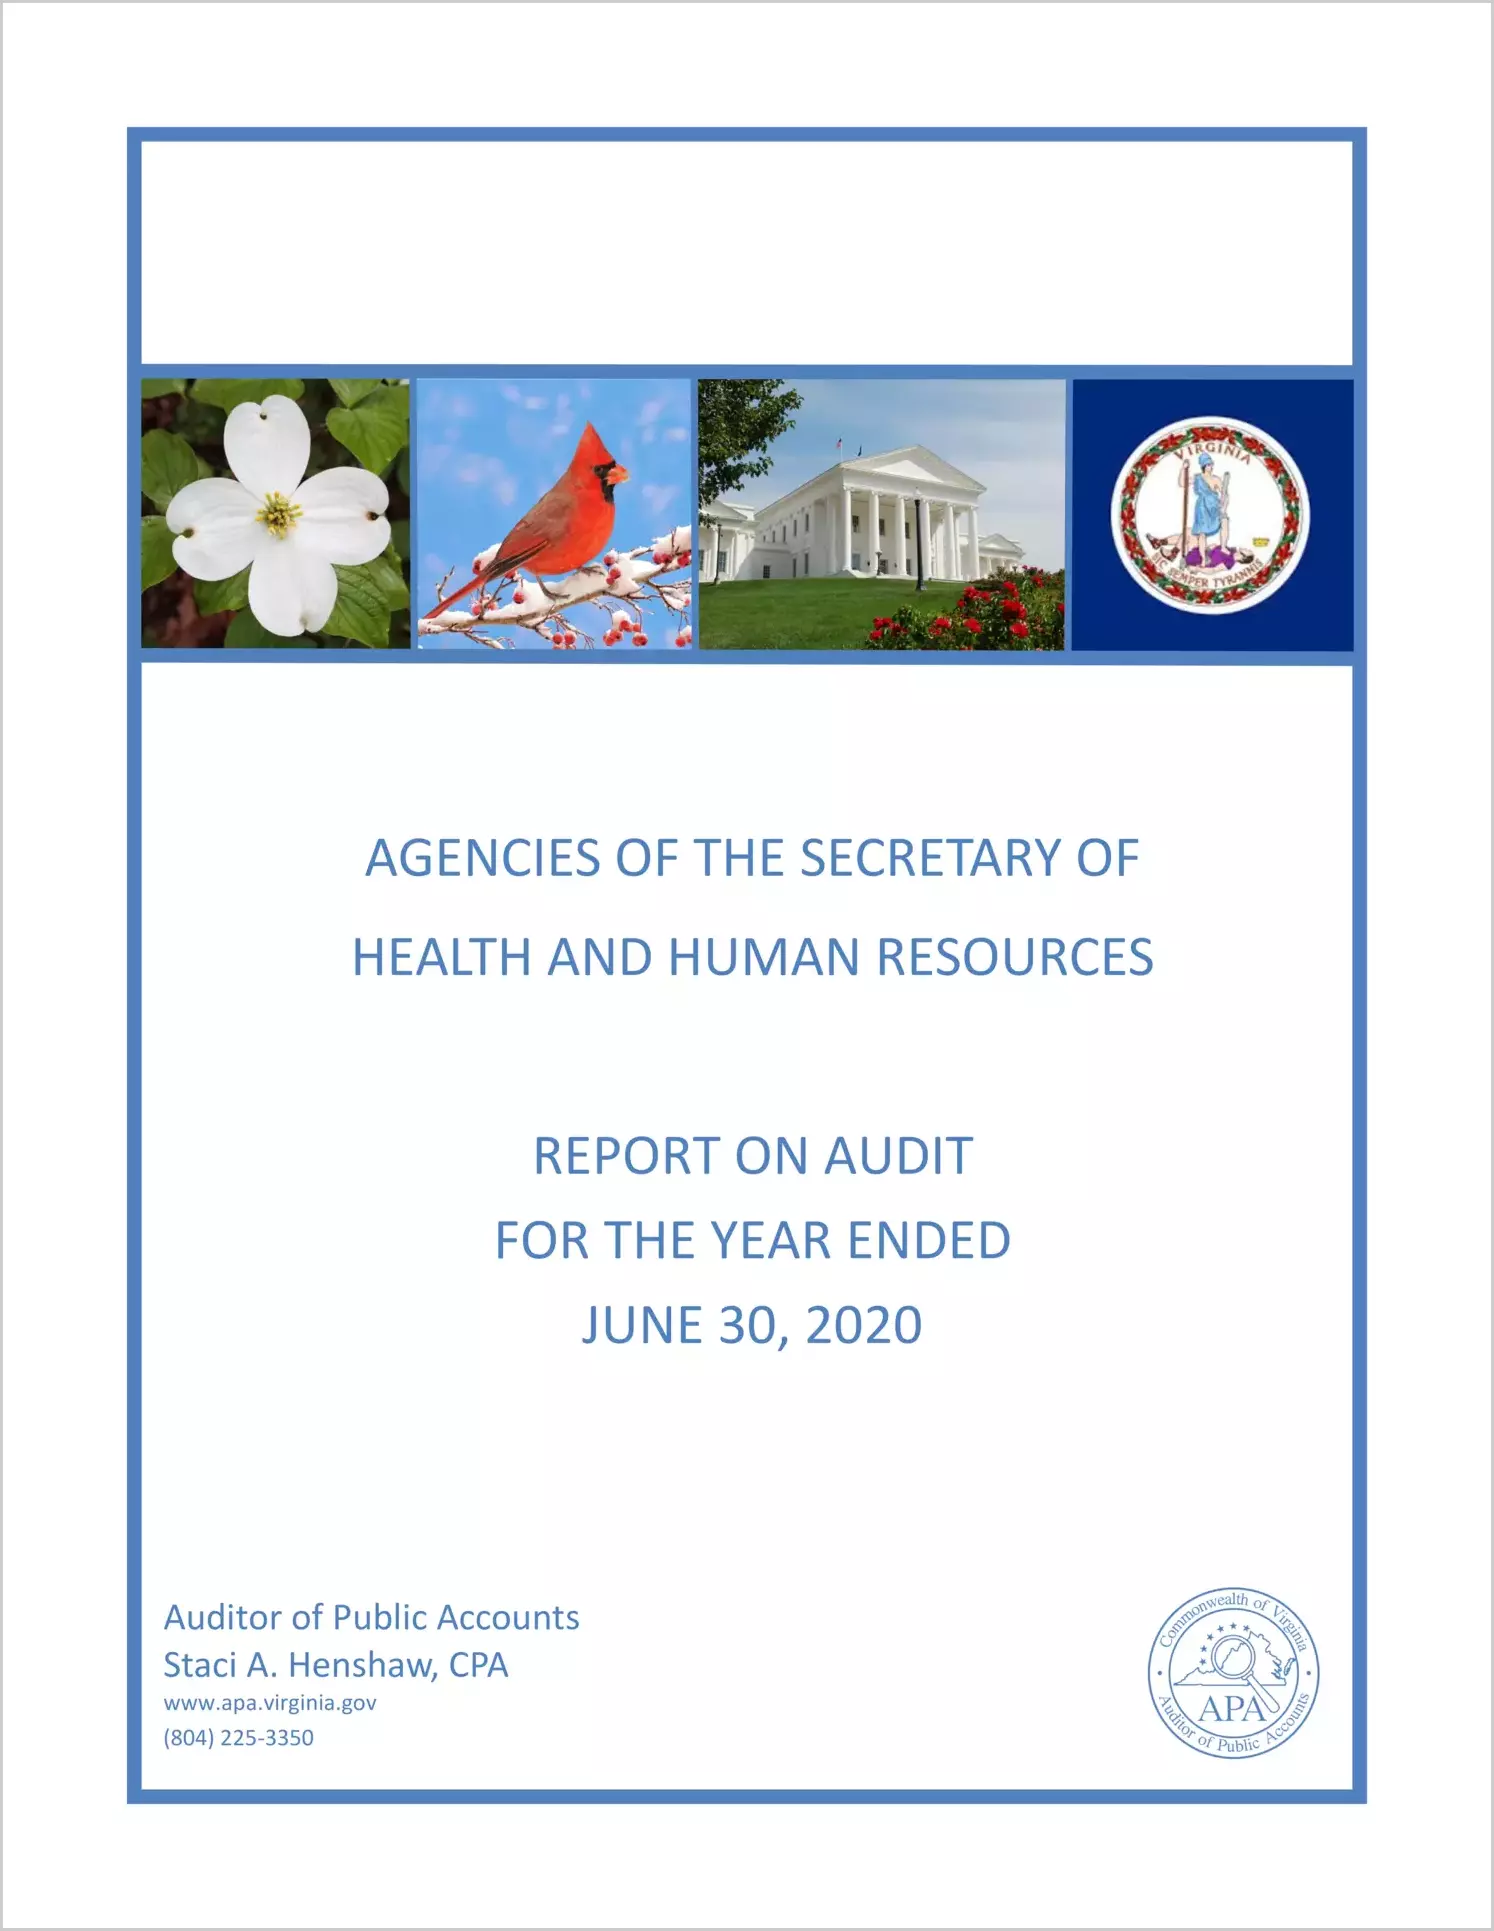 Agencies of the Secretary of Health and Human Resources for the year ended June 30, 2020